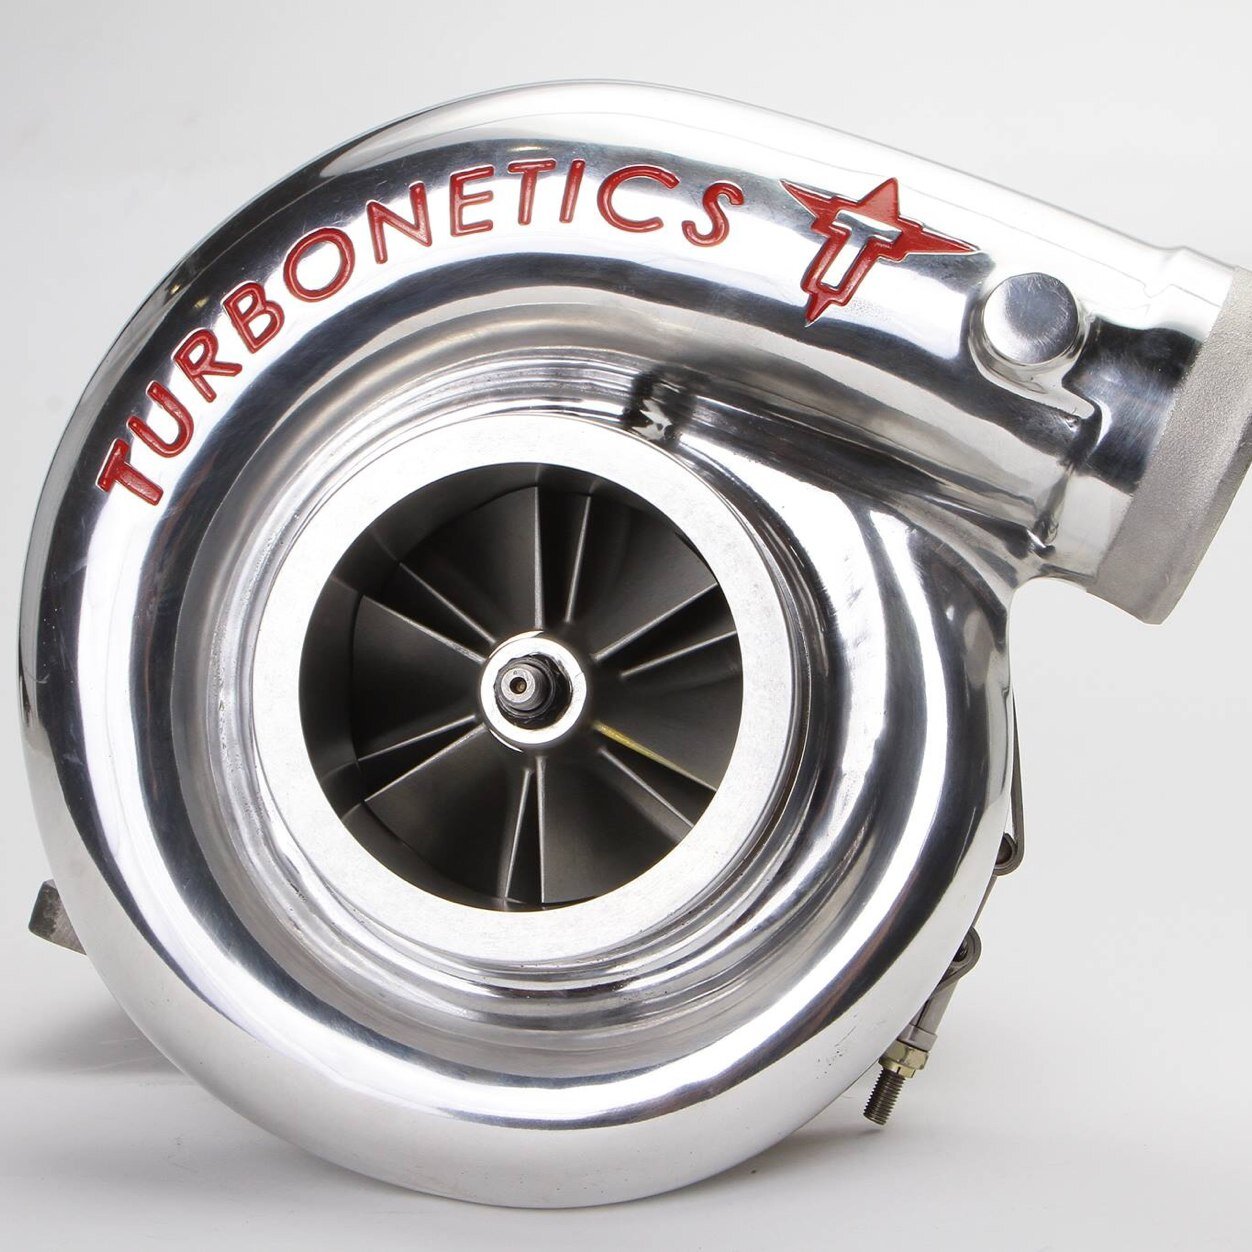 We specialize in designing and producing turbochargers, intercoolers, turbo systems & controls for automotive gas, diesel and industrial applications.